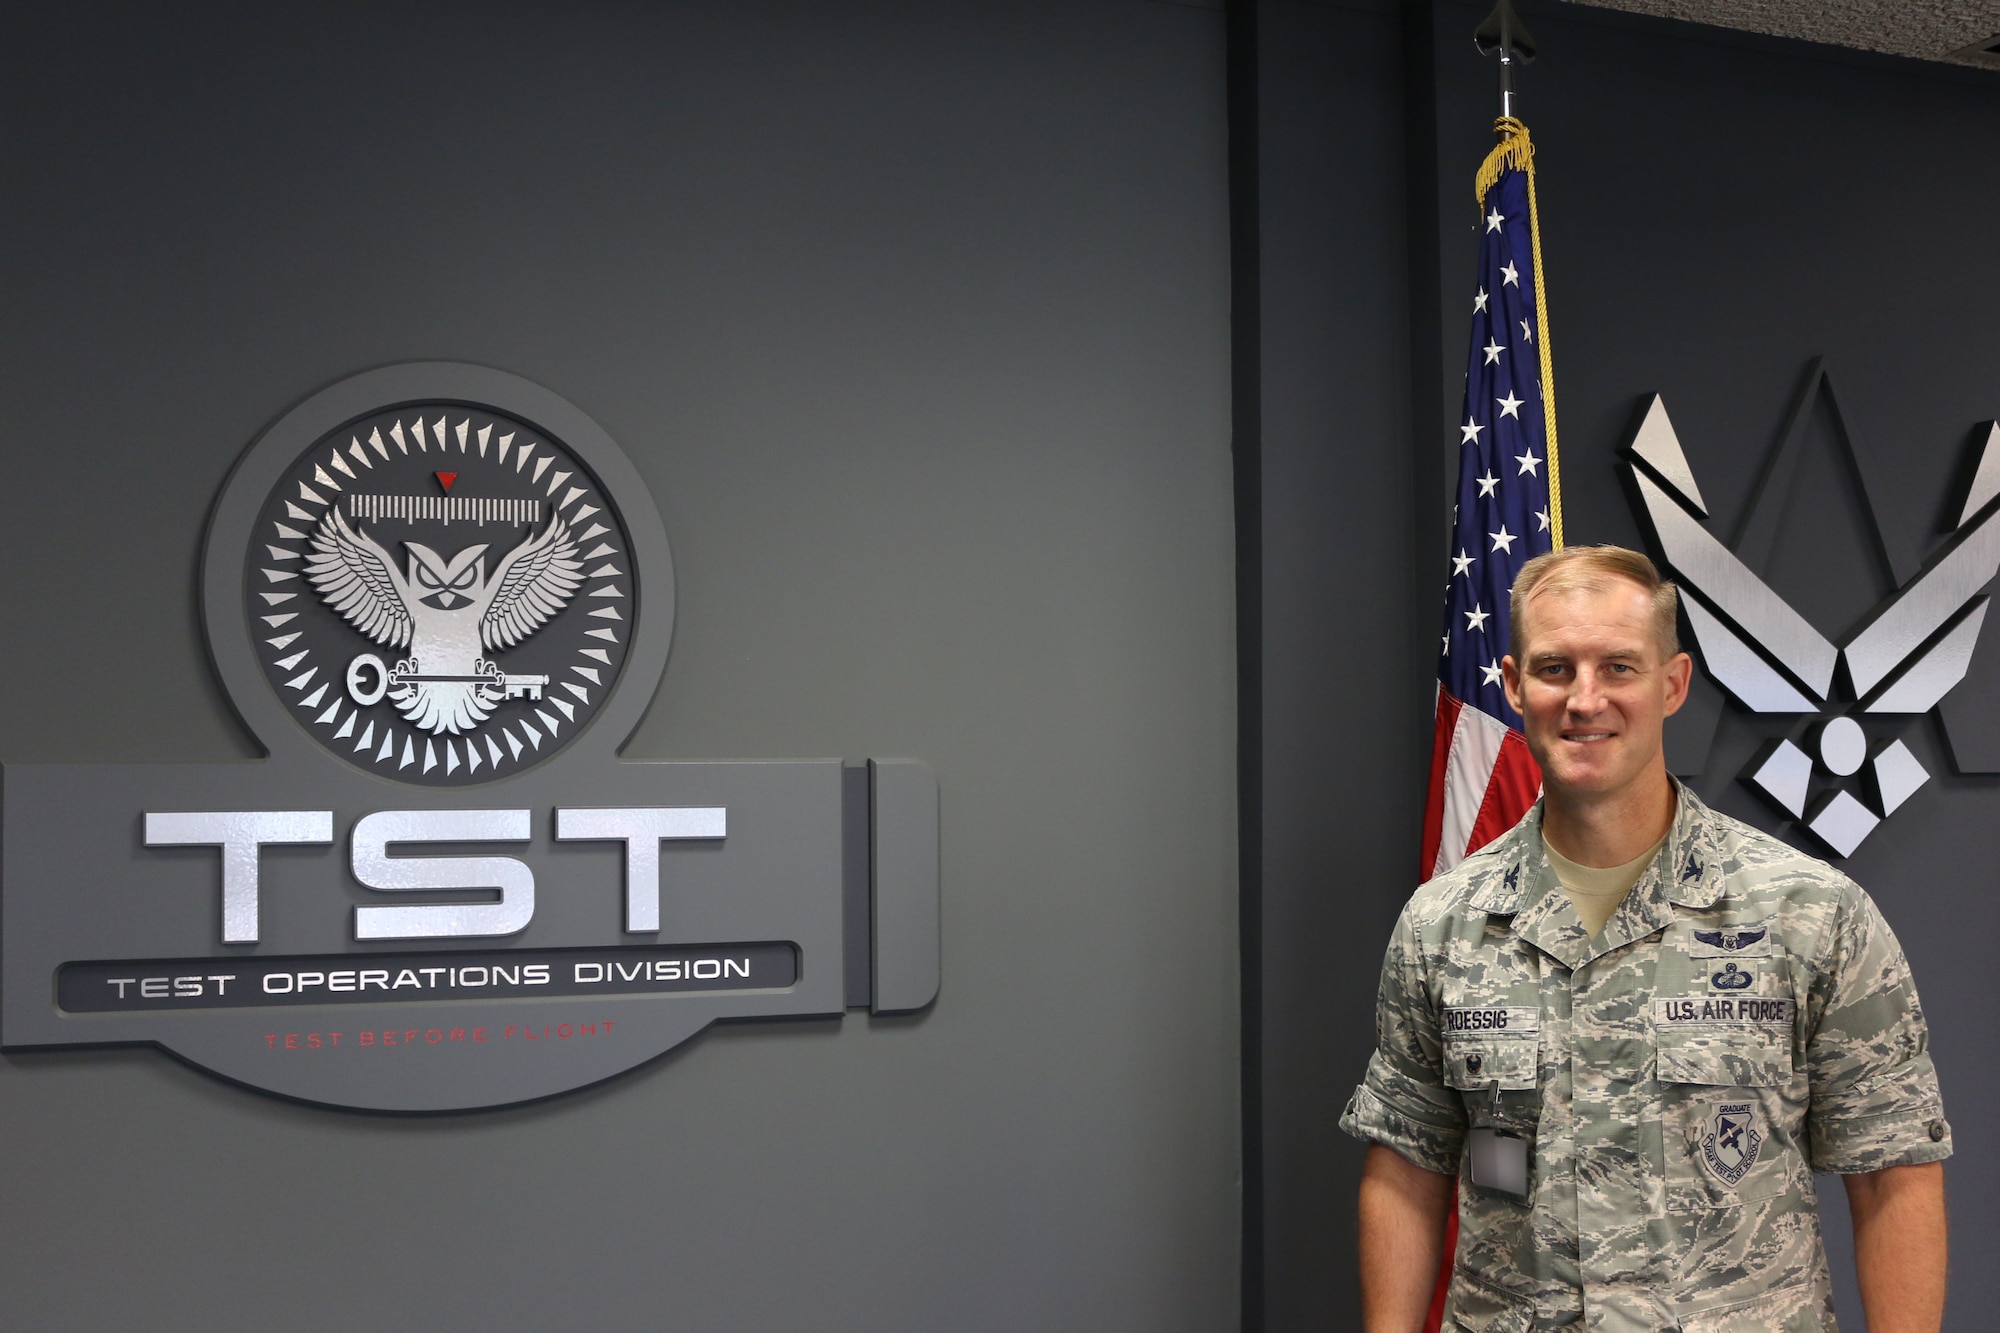 Col. Keith Roessig recently assumed the position of chief of the AEDC Test Operations Division. (U.S. Air Force photos by Bradley Hicks) (Images were manipulated by obscuring badges for security purposes)